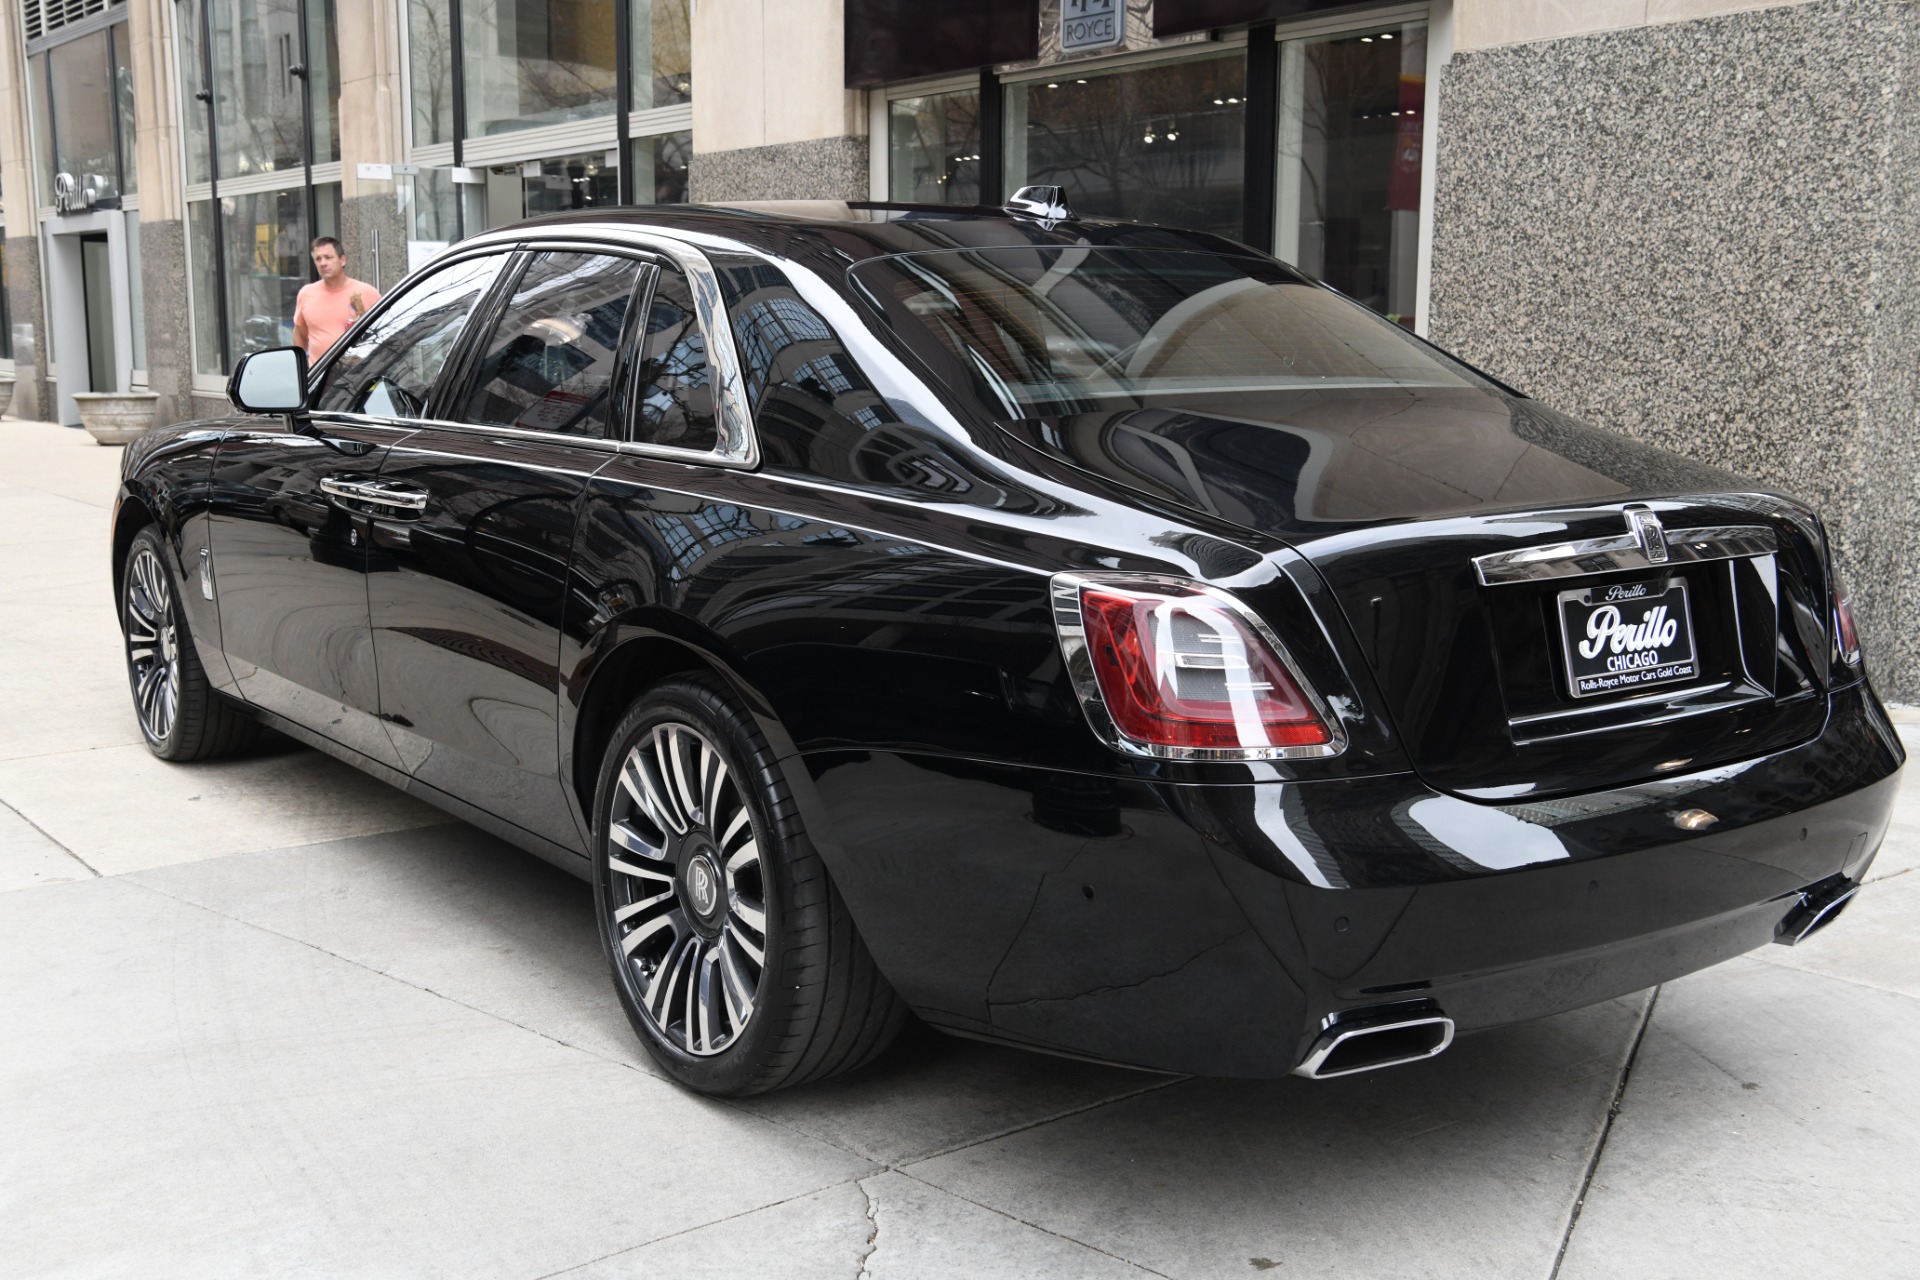 2023 Rolls-Royce Ghost Stock # R1051 for sale near Chicago, IL 